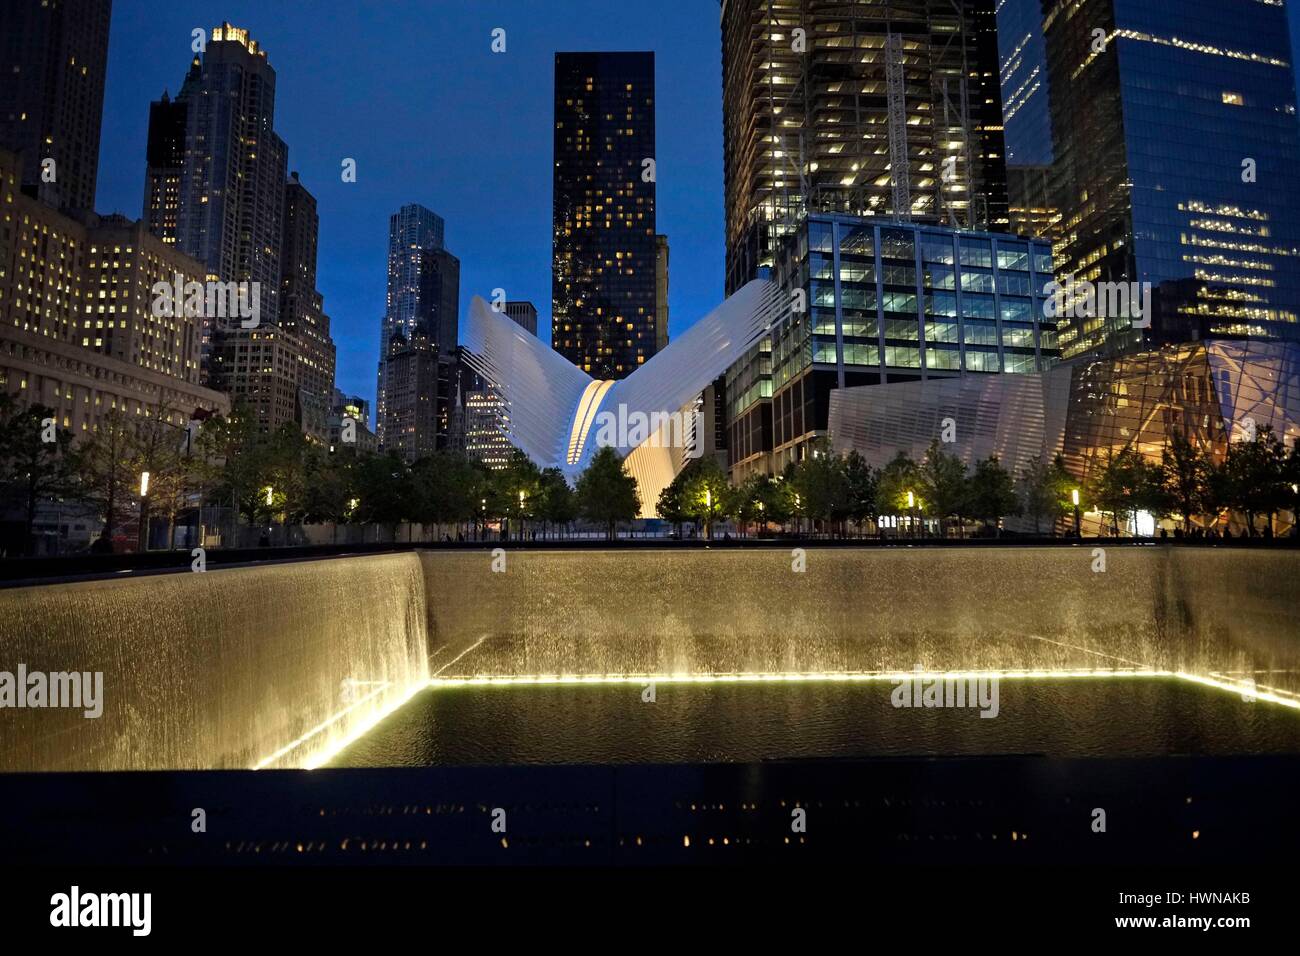 United States of America, New York, Manhattan, the National September 11 Memorial & Museum also known as the 9/11 Memorial and 9/11 Memorial Museum commemorates the September 11, 2001 attacks which killed 2,977 people, Stock Photo